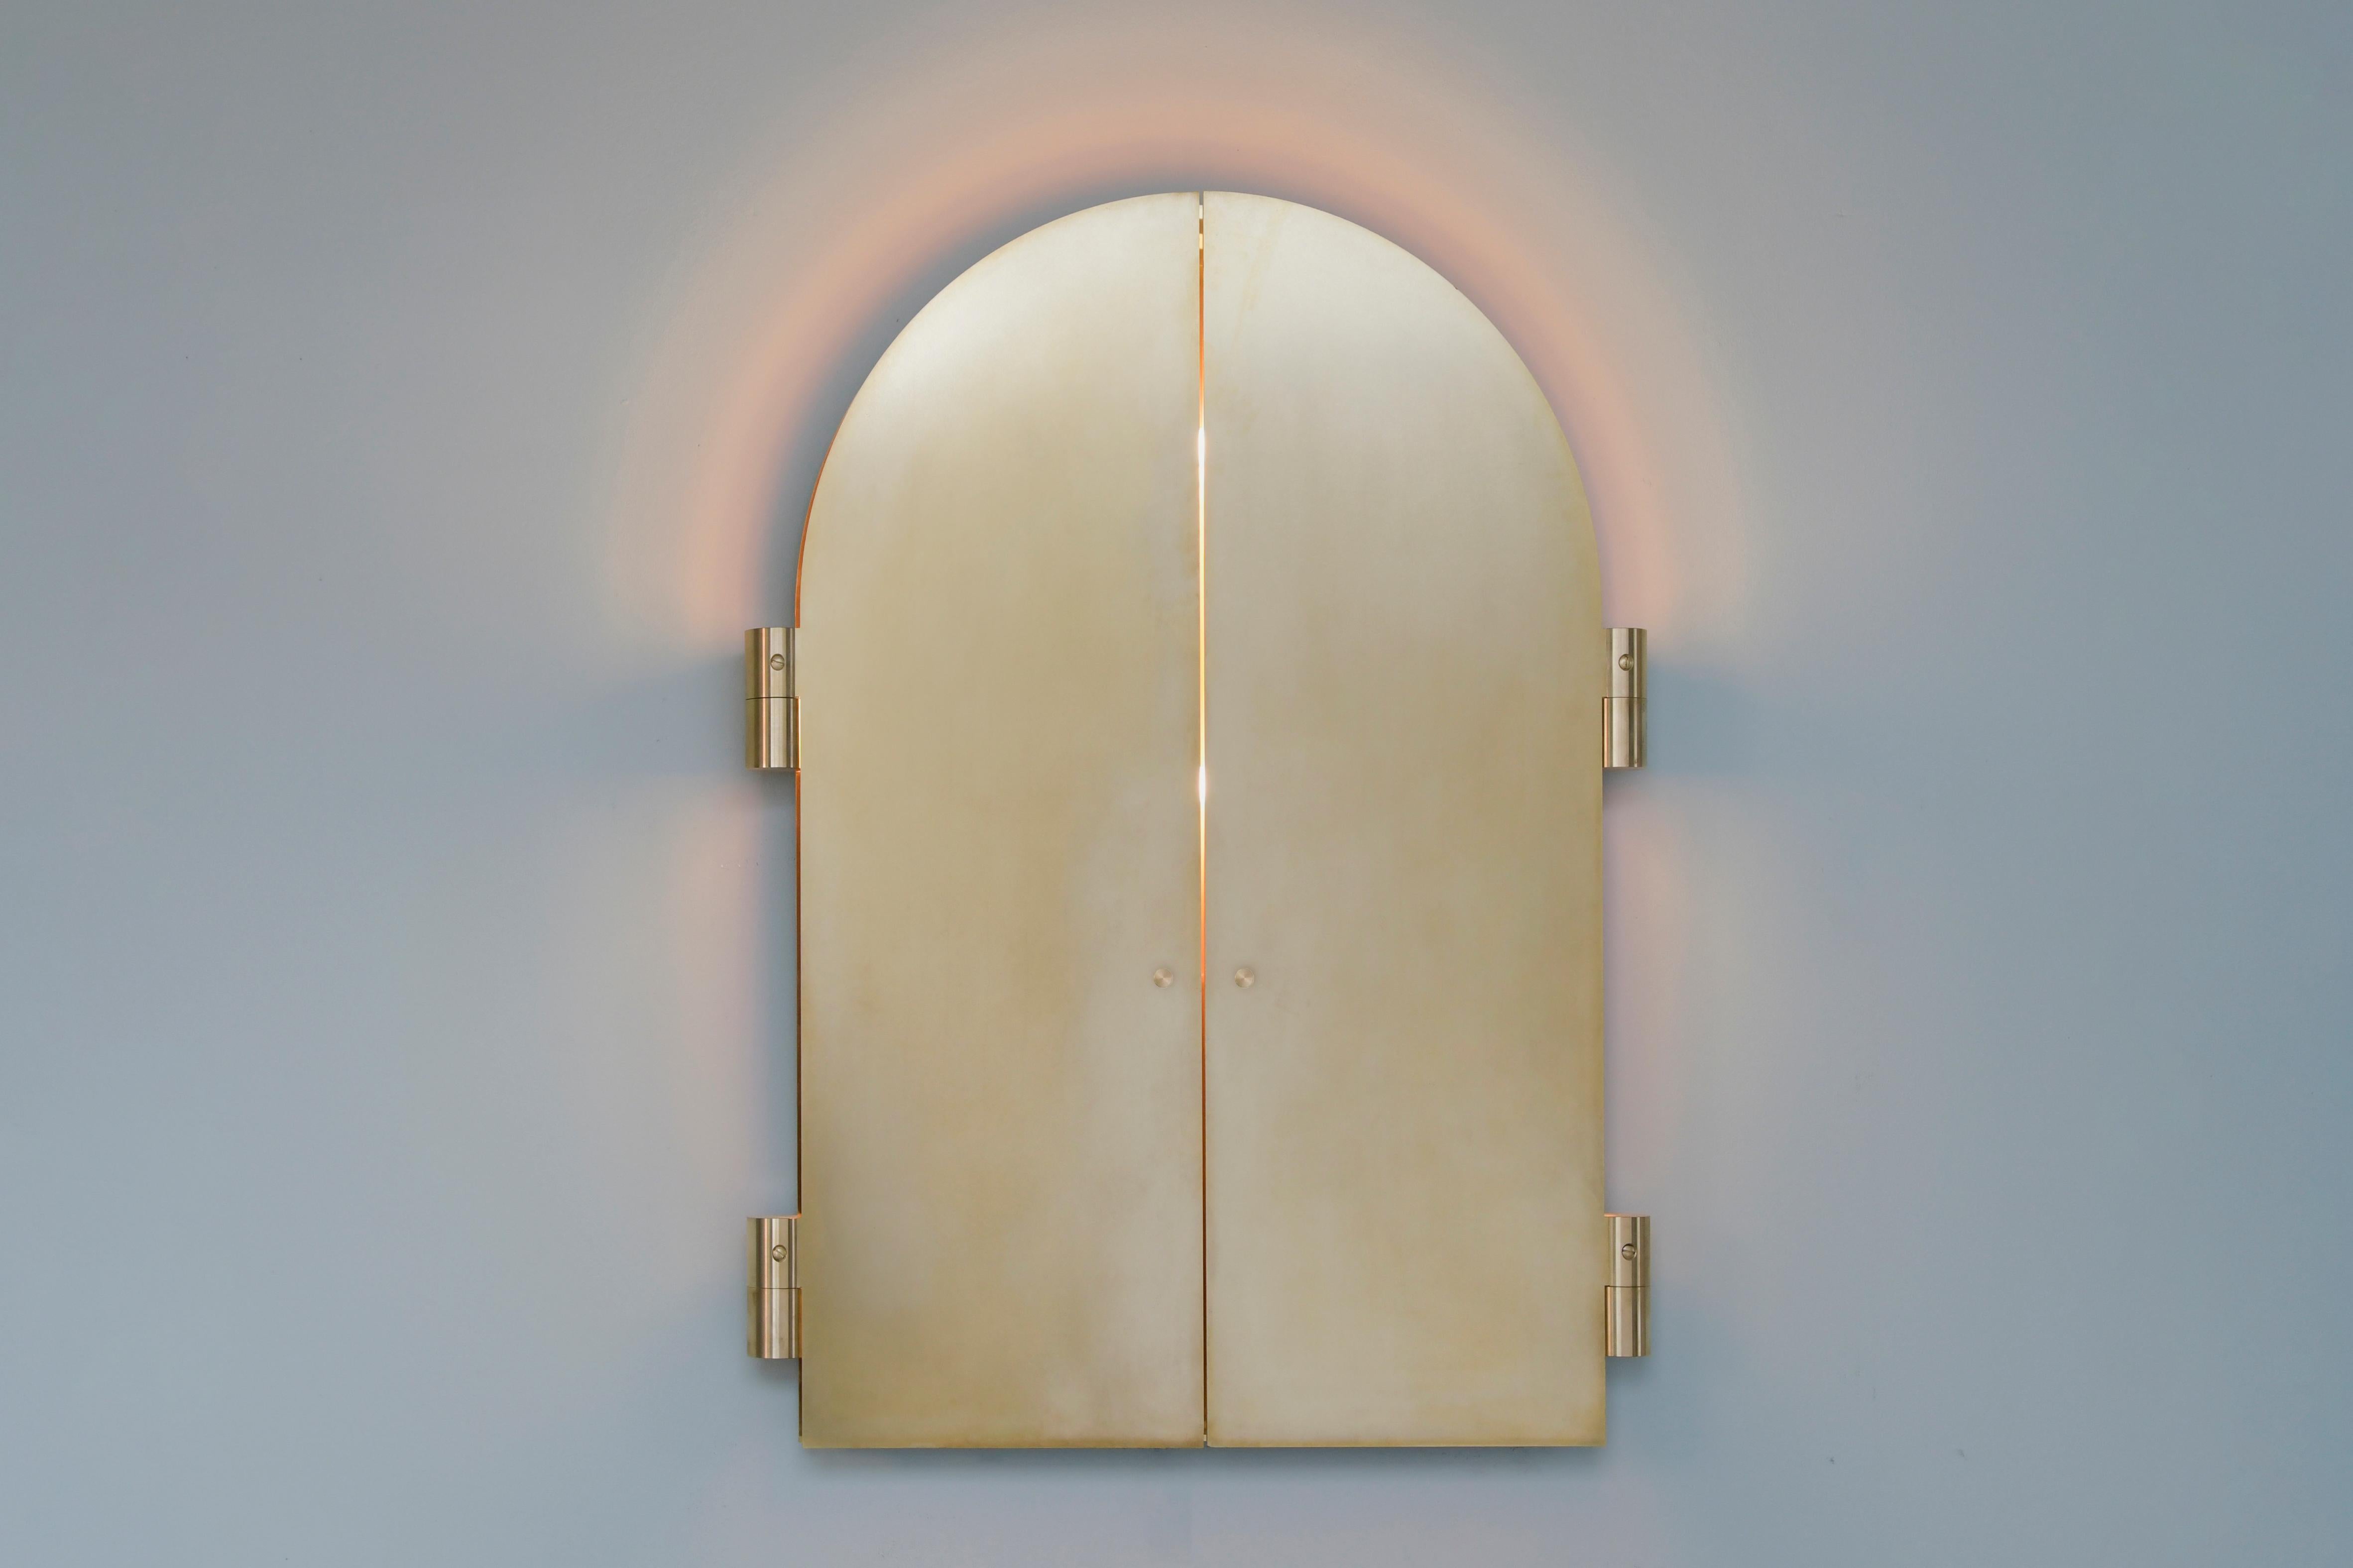 Brass Triptychs Enlighted mirror - Jesse Visser
Dimensions: 100 x 140 x 5 cm
Brass, polished stainless steel, dimmable LED light

The Triptych Circle is a circular triptych made out of polished brass. The doors consist of 3 mm brass and can be